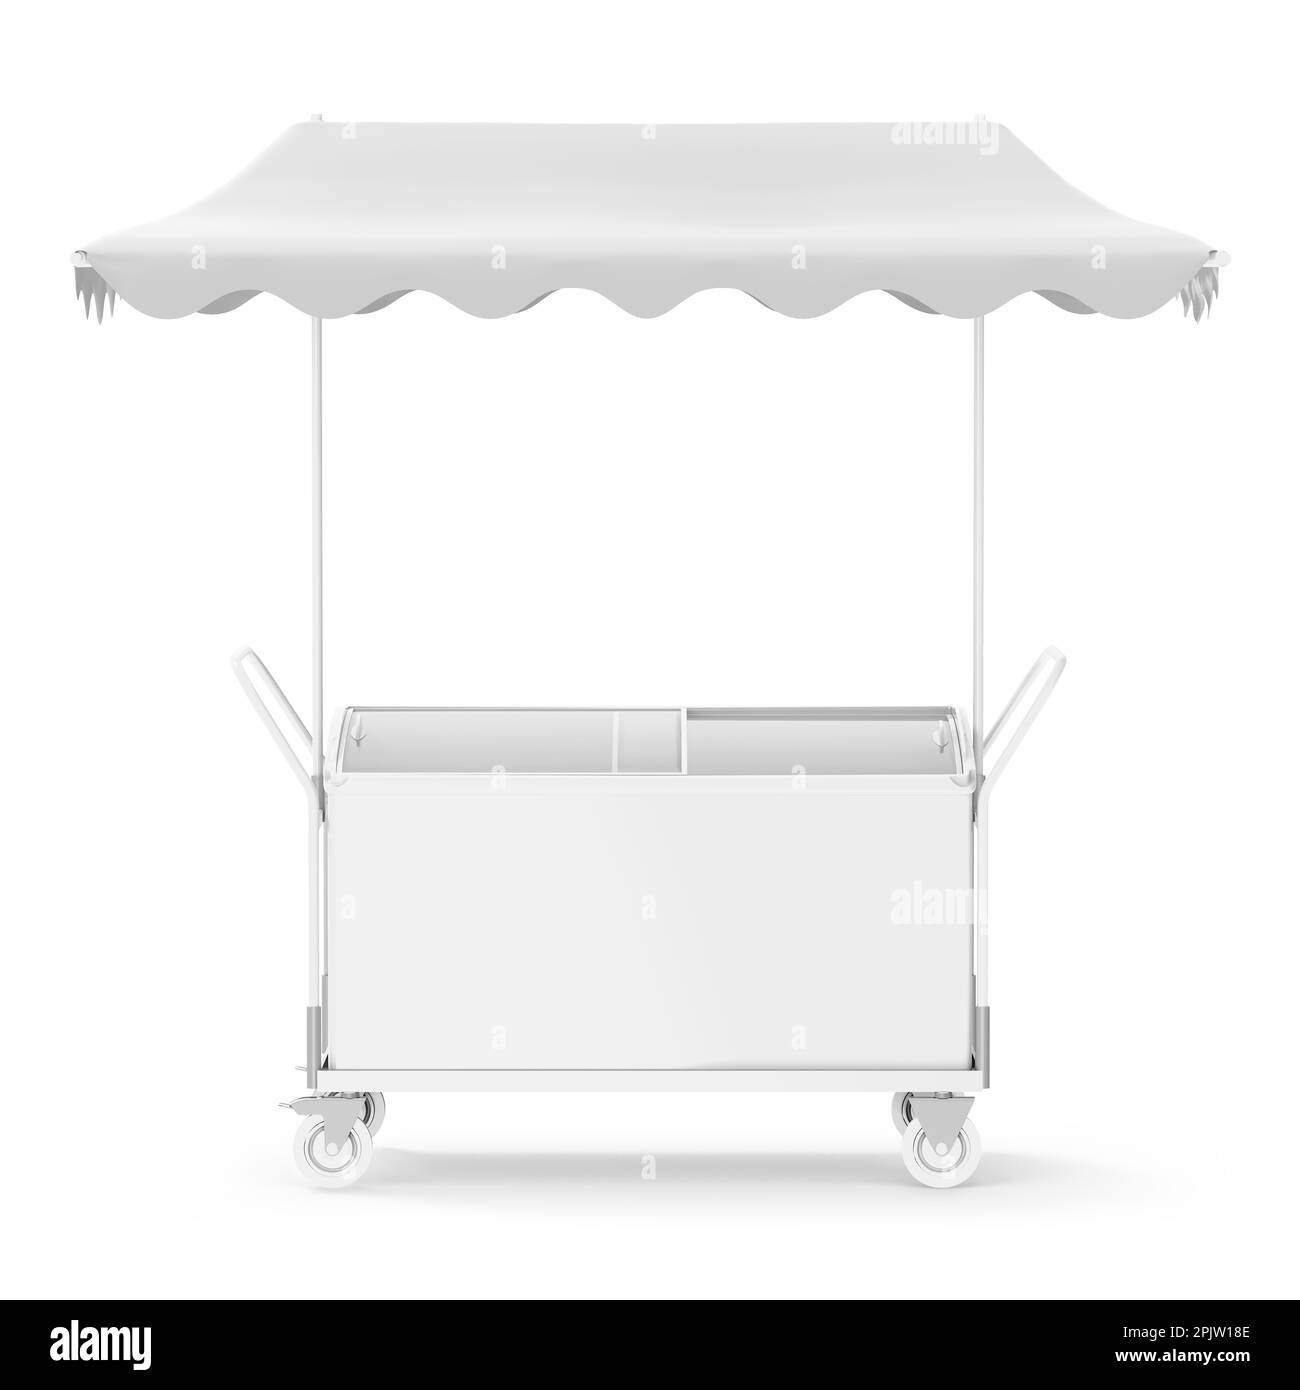 Ice Cream Fridge with Awning 3D Rendering on White Background for Advertising Stock Photo